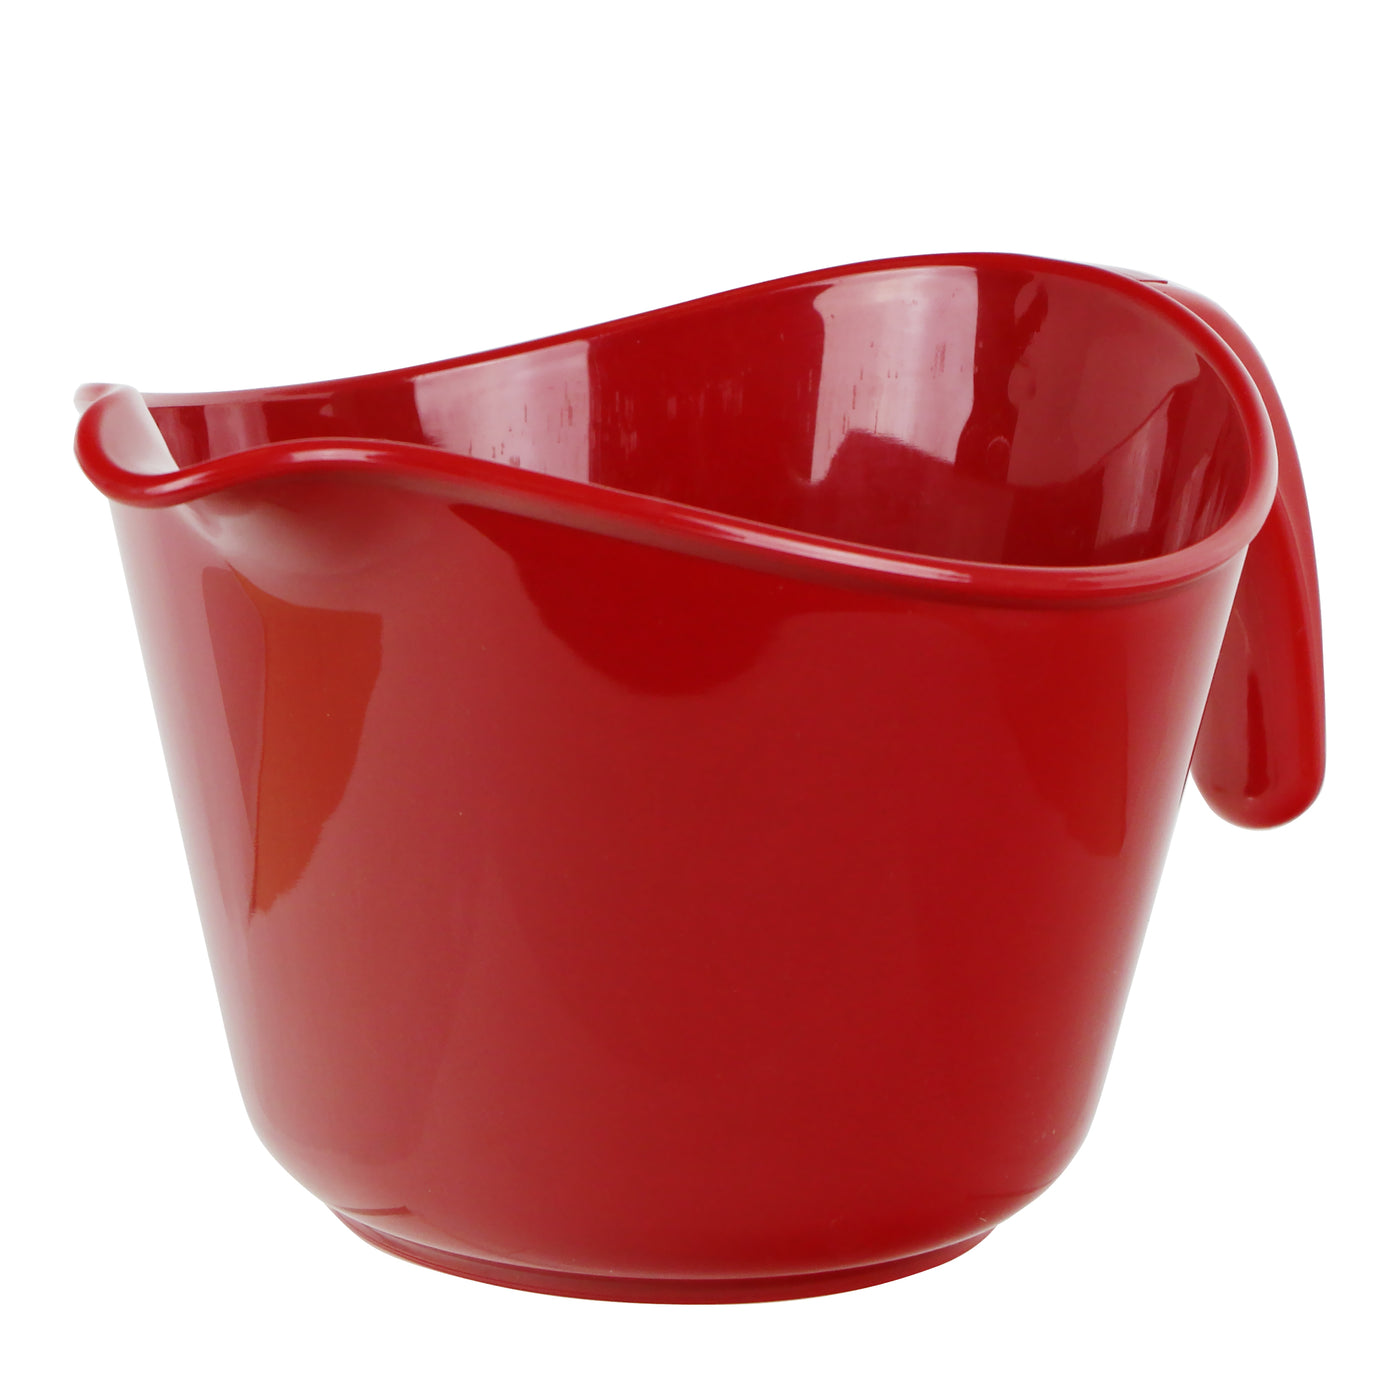 Cuisipro Deluxe Batter Bowl Mixing With Handle And Measurements, Red, 1 ea  - City Market